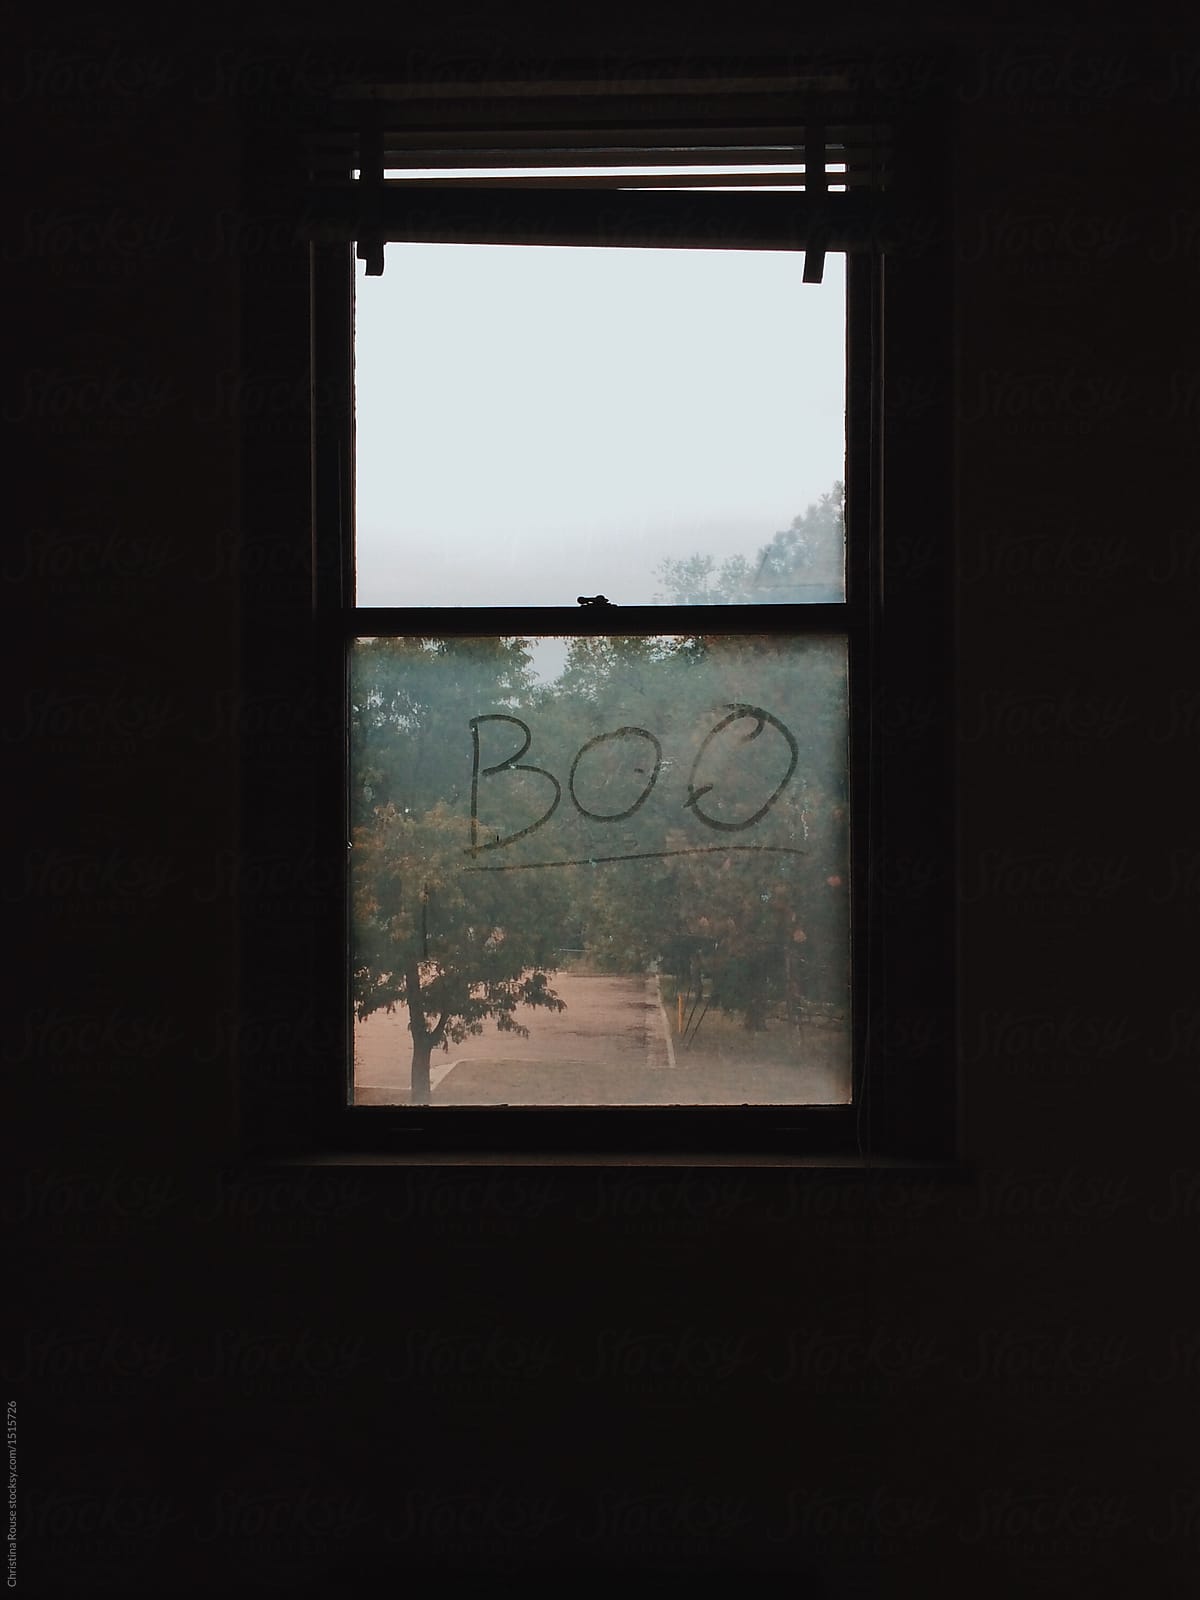 Boo written on a dirty window in an abandoned building